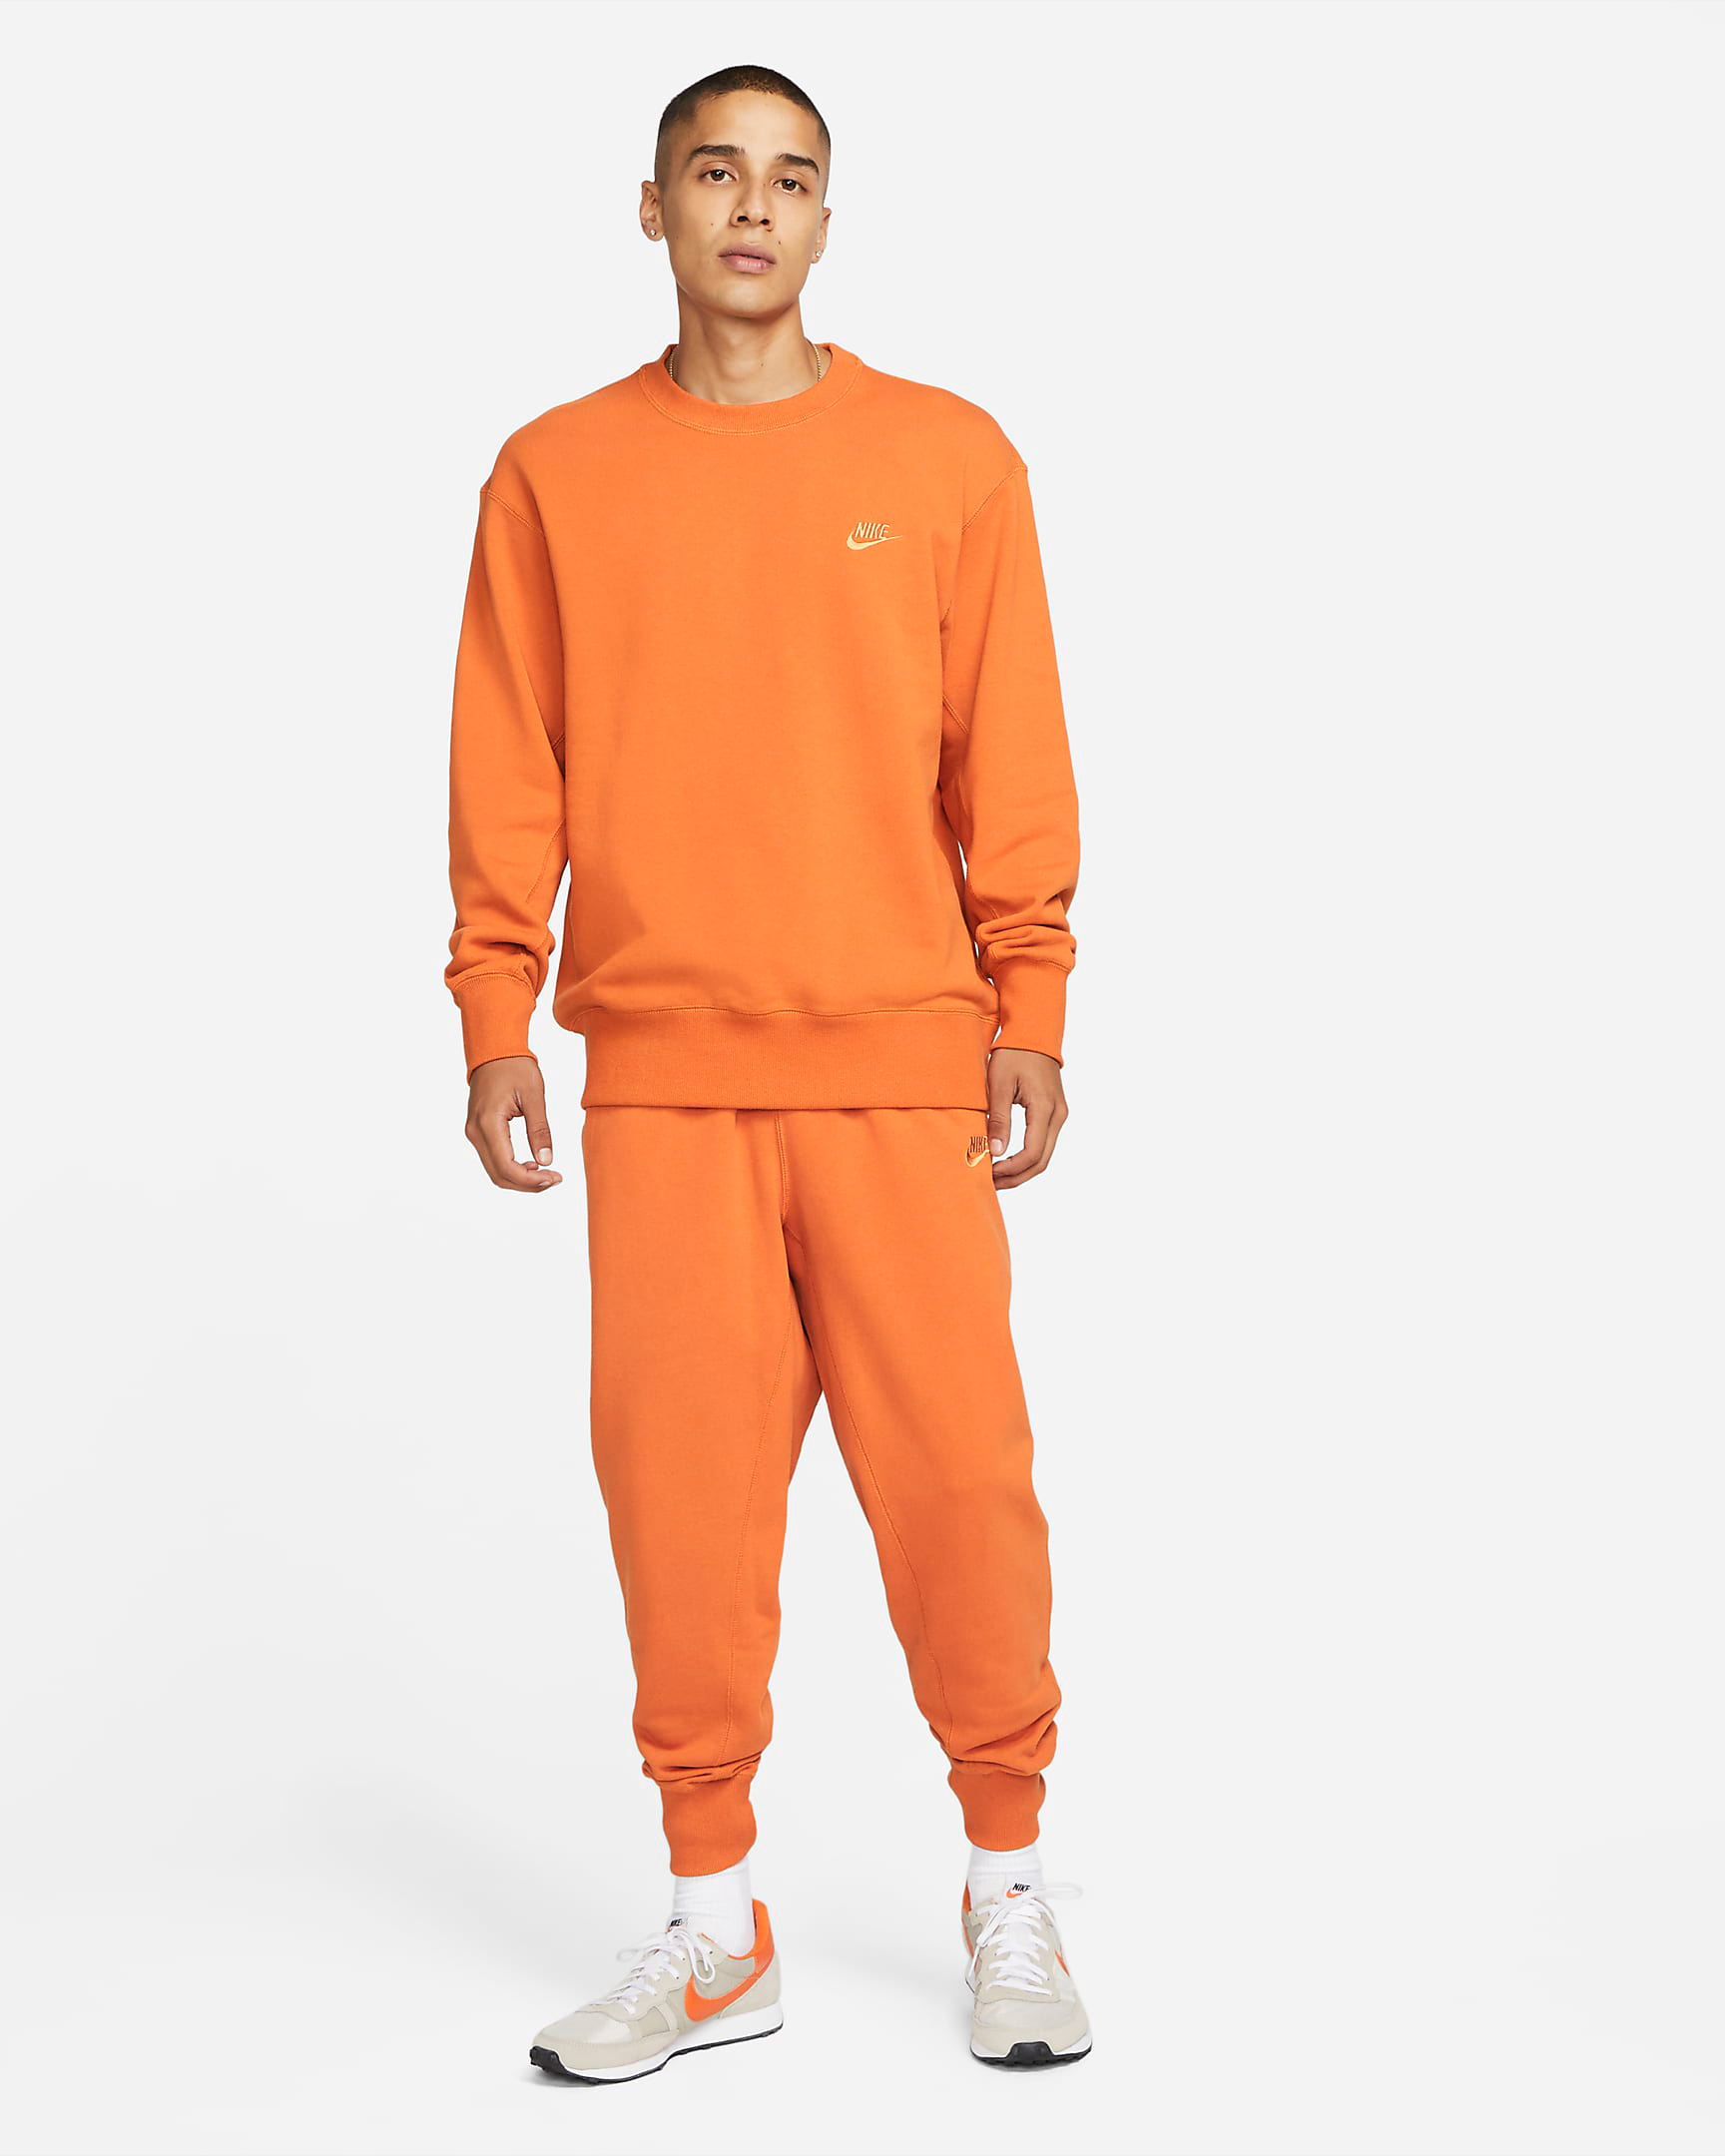 Nike Hot Curry Orange Clothing Shirts Sneaker Outfits